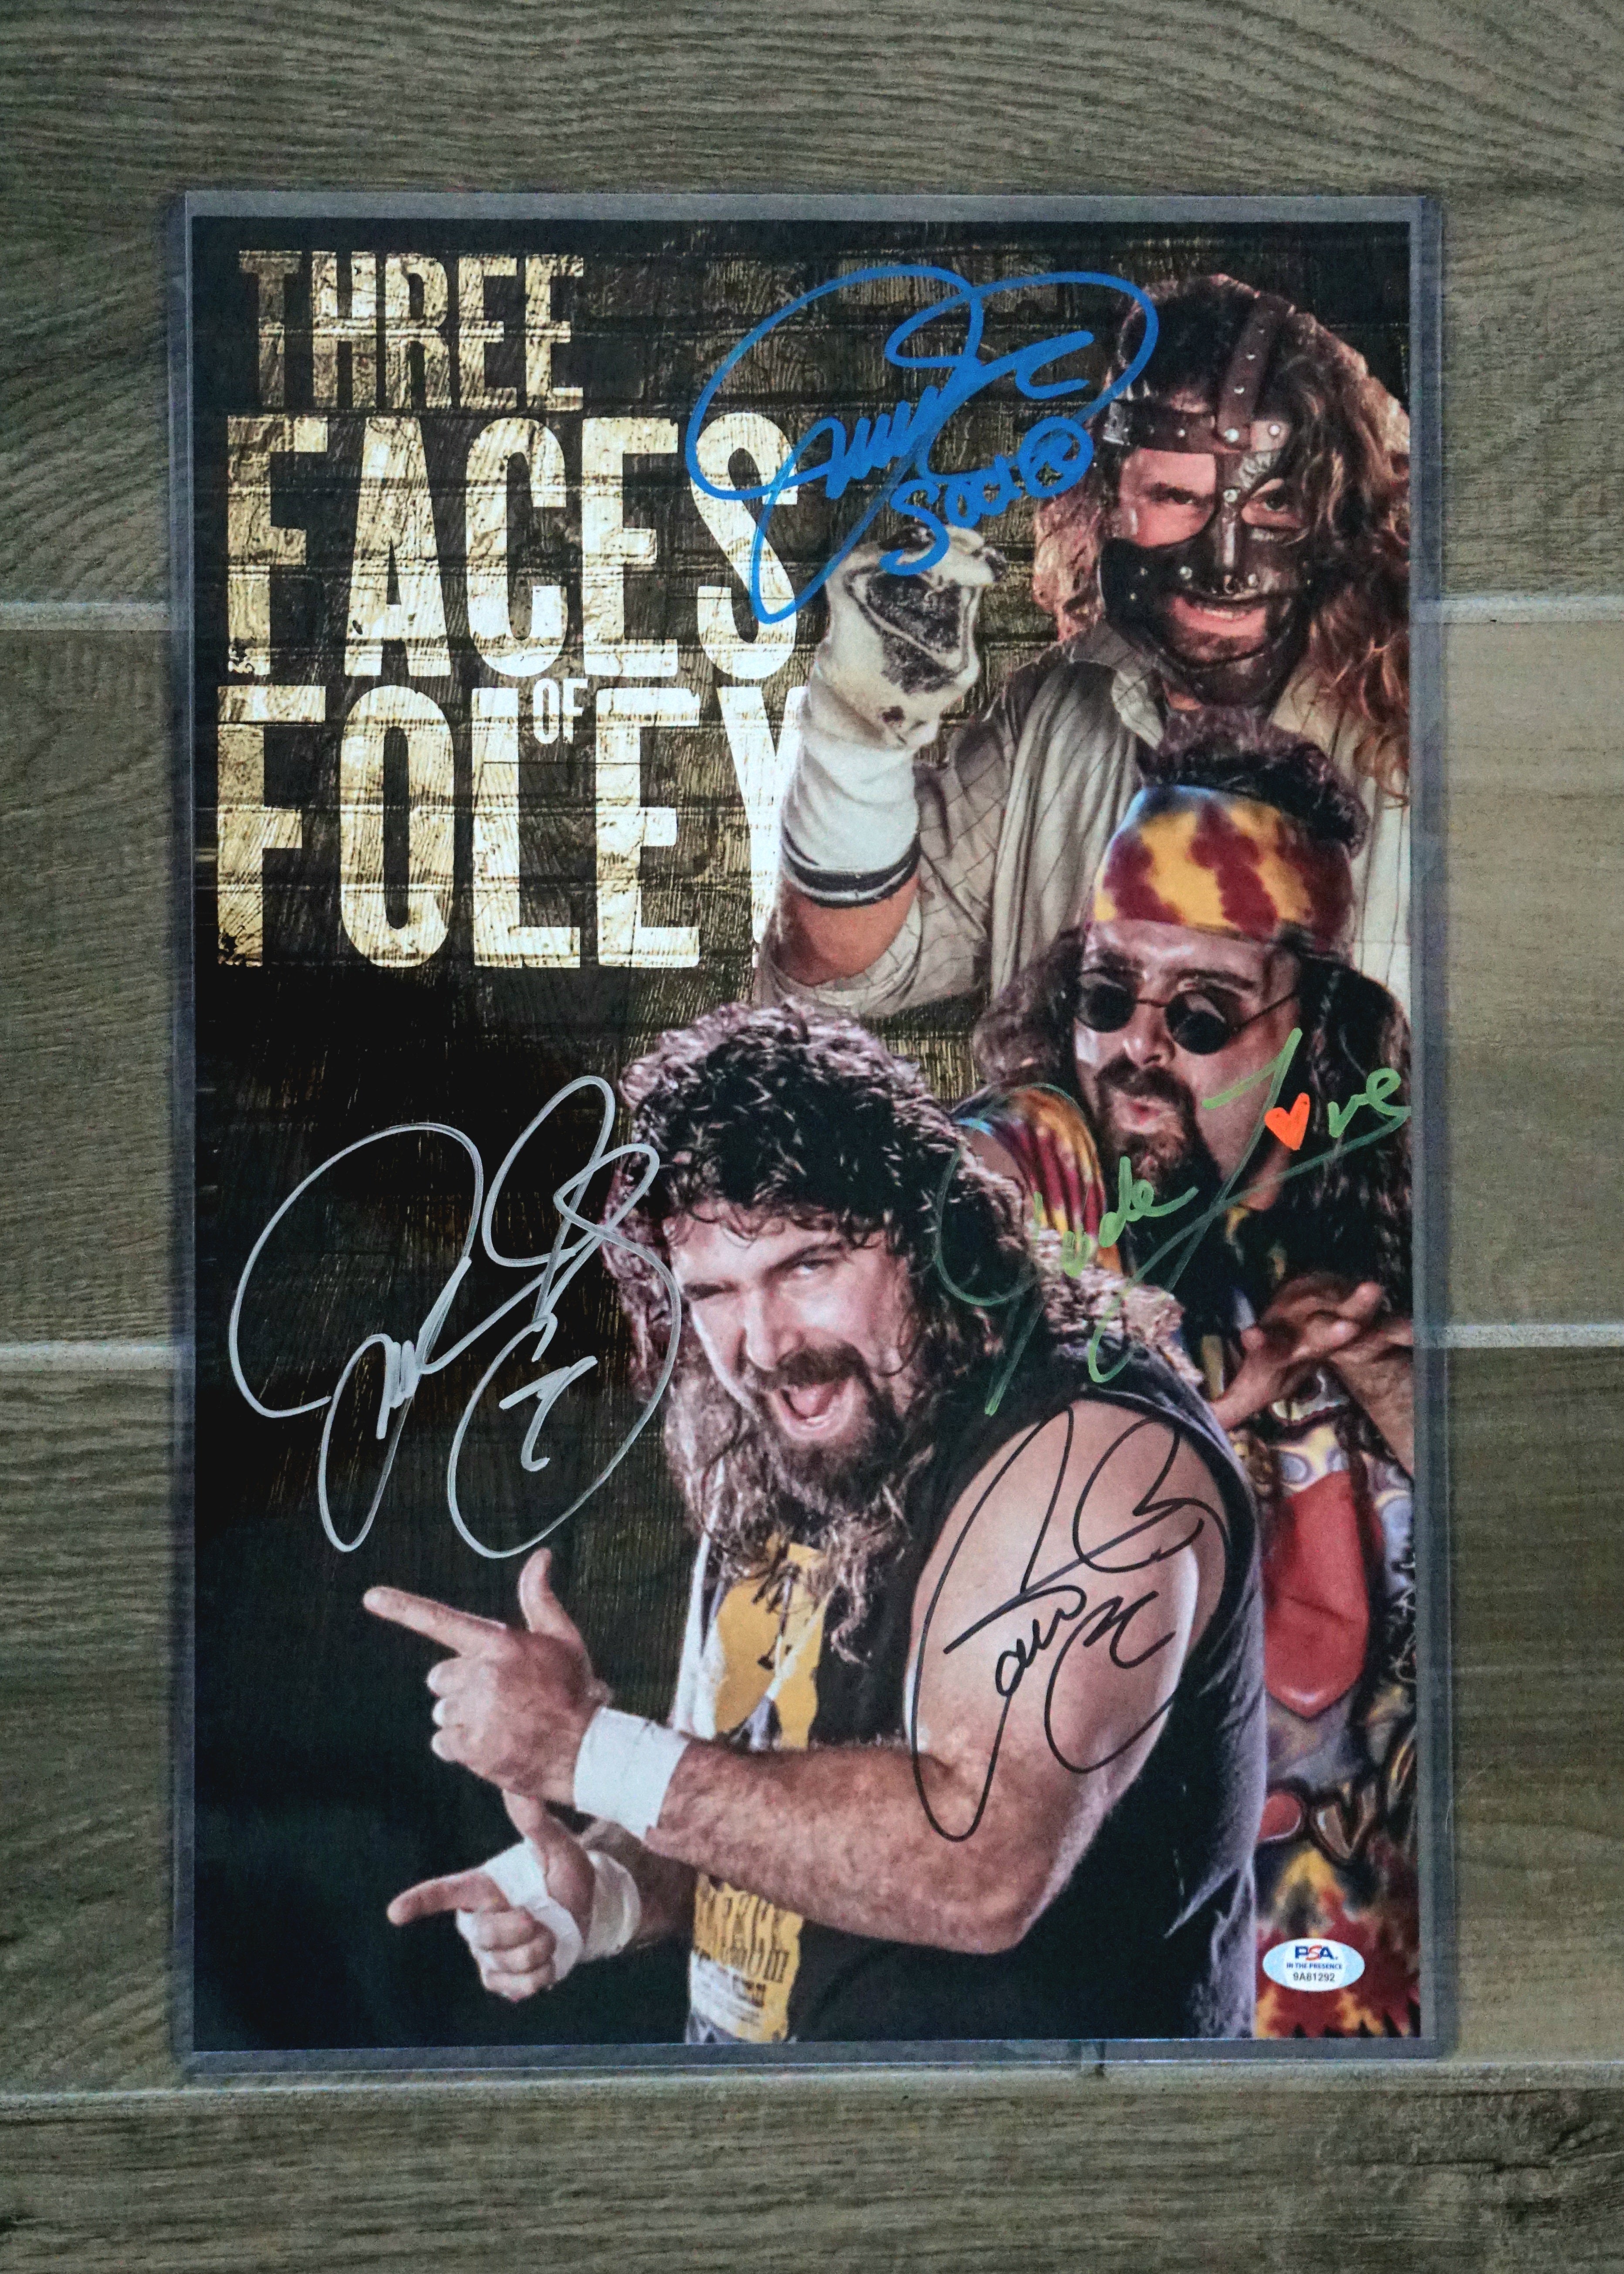 3 Faces of Foley 12x18 Blue Mankind with inscriptions "Socko" - Signed by Mick Foley by all 3 characters Mankind, Dude, Love Cactus Jack as Mick Foley